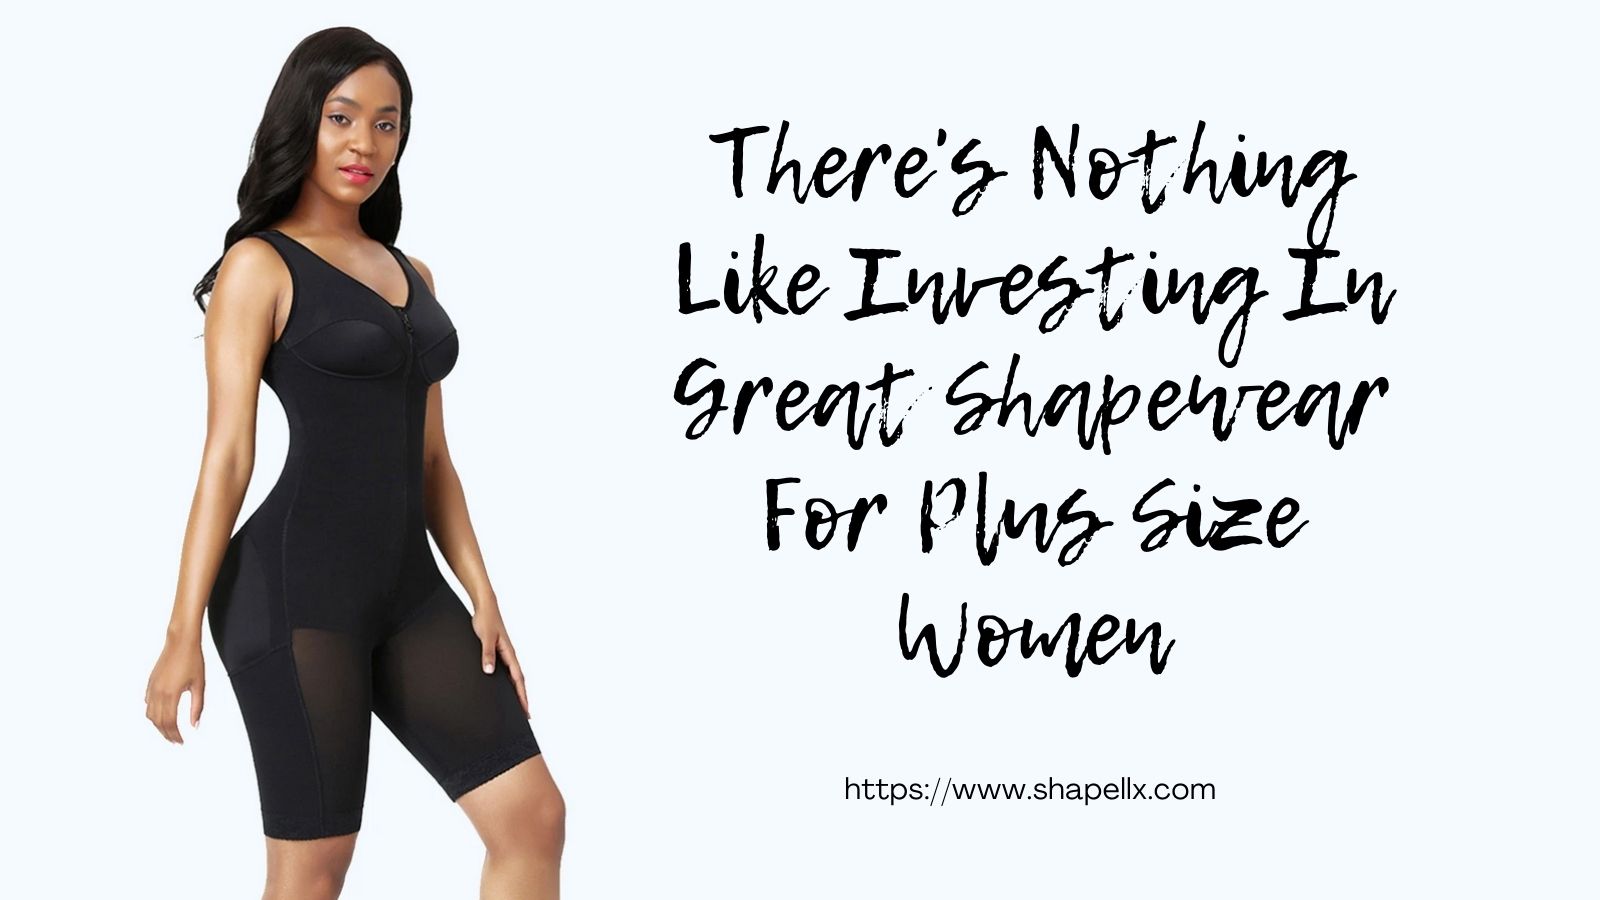 There's Nothing Like Investing In Great Shapewear For Plus Size Women